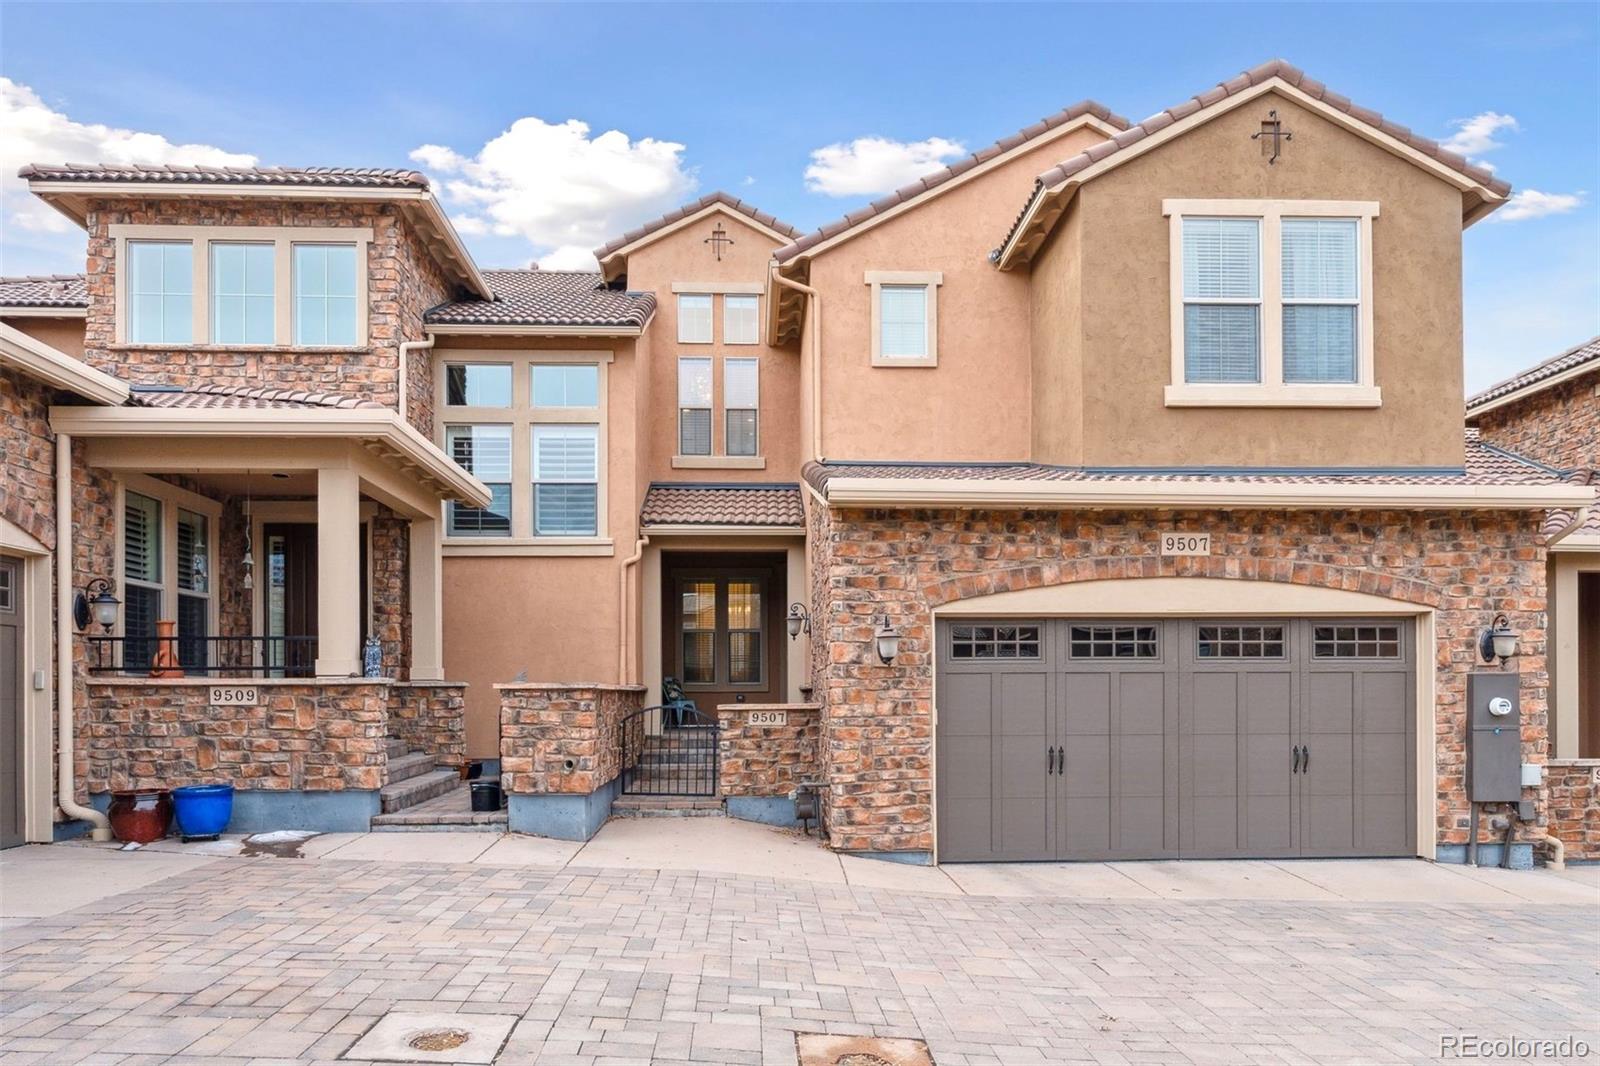 9507  pendio court, highlands ranch sold home. Closed on 2024-02-29 for $958,000.